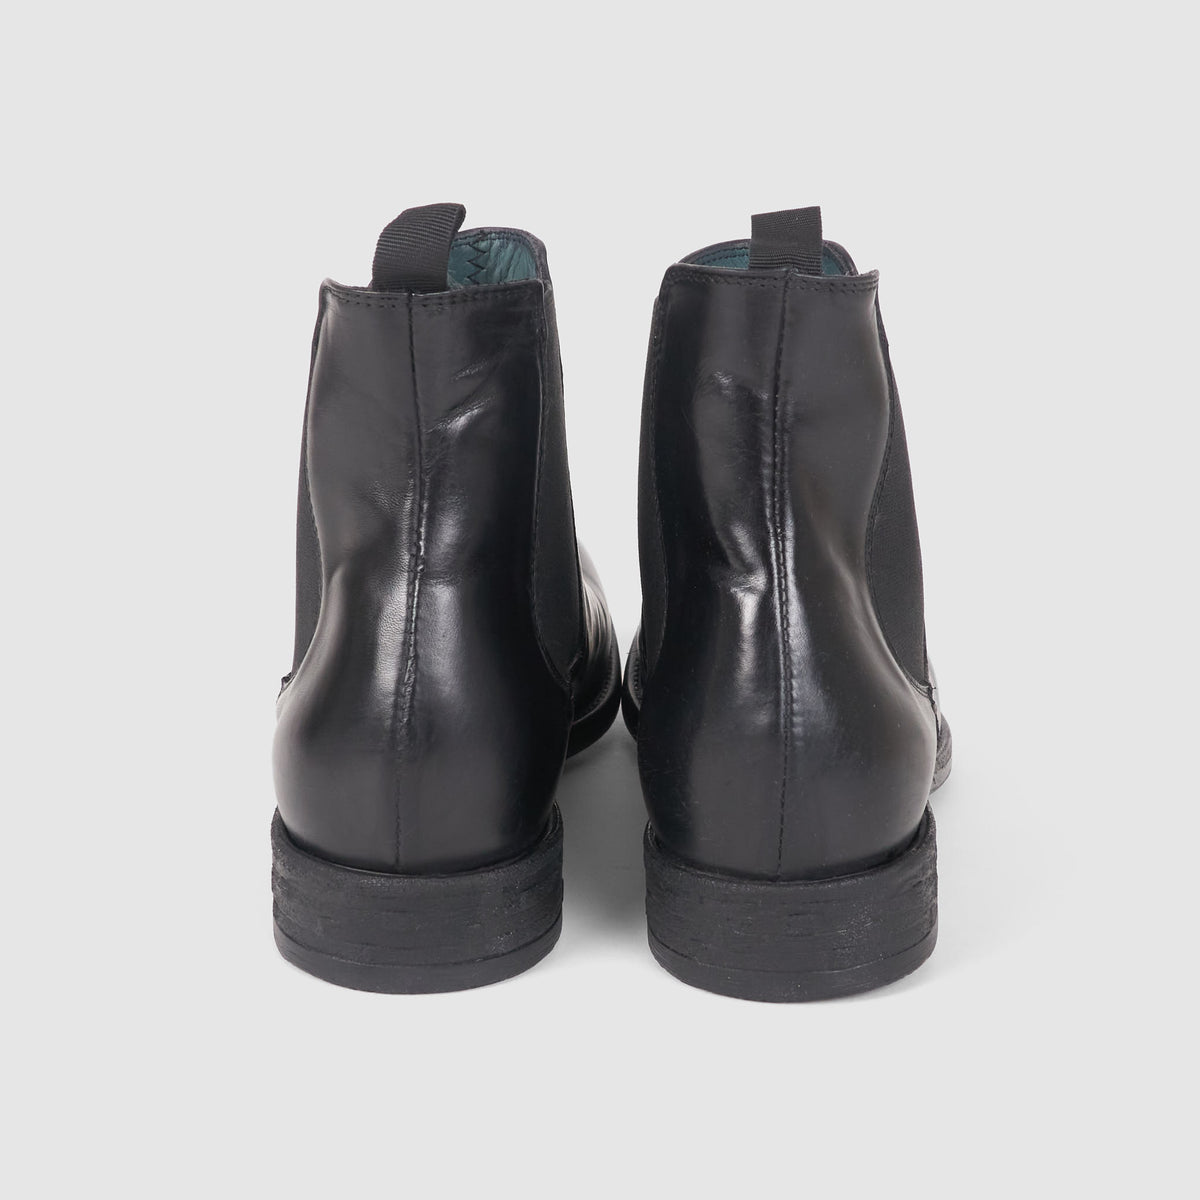 Crispiniano Firenze Chelsea Boot